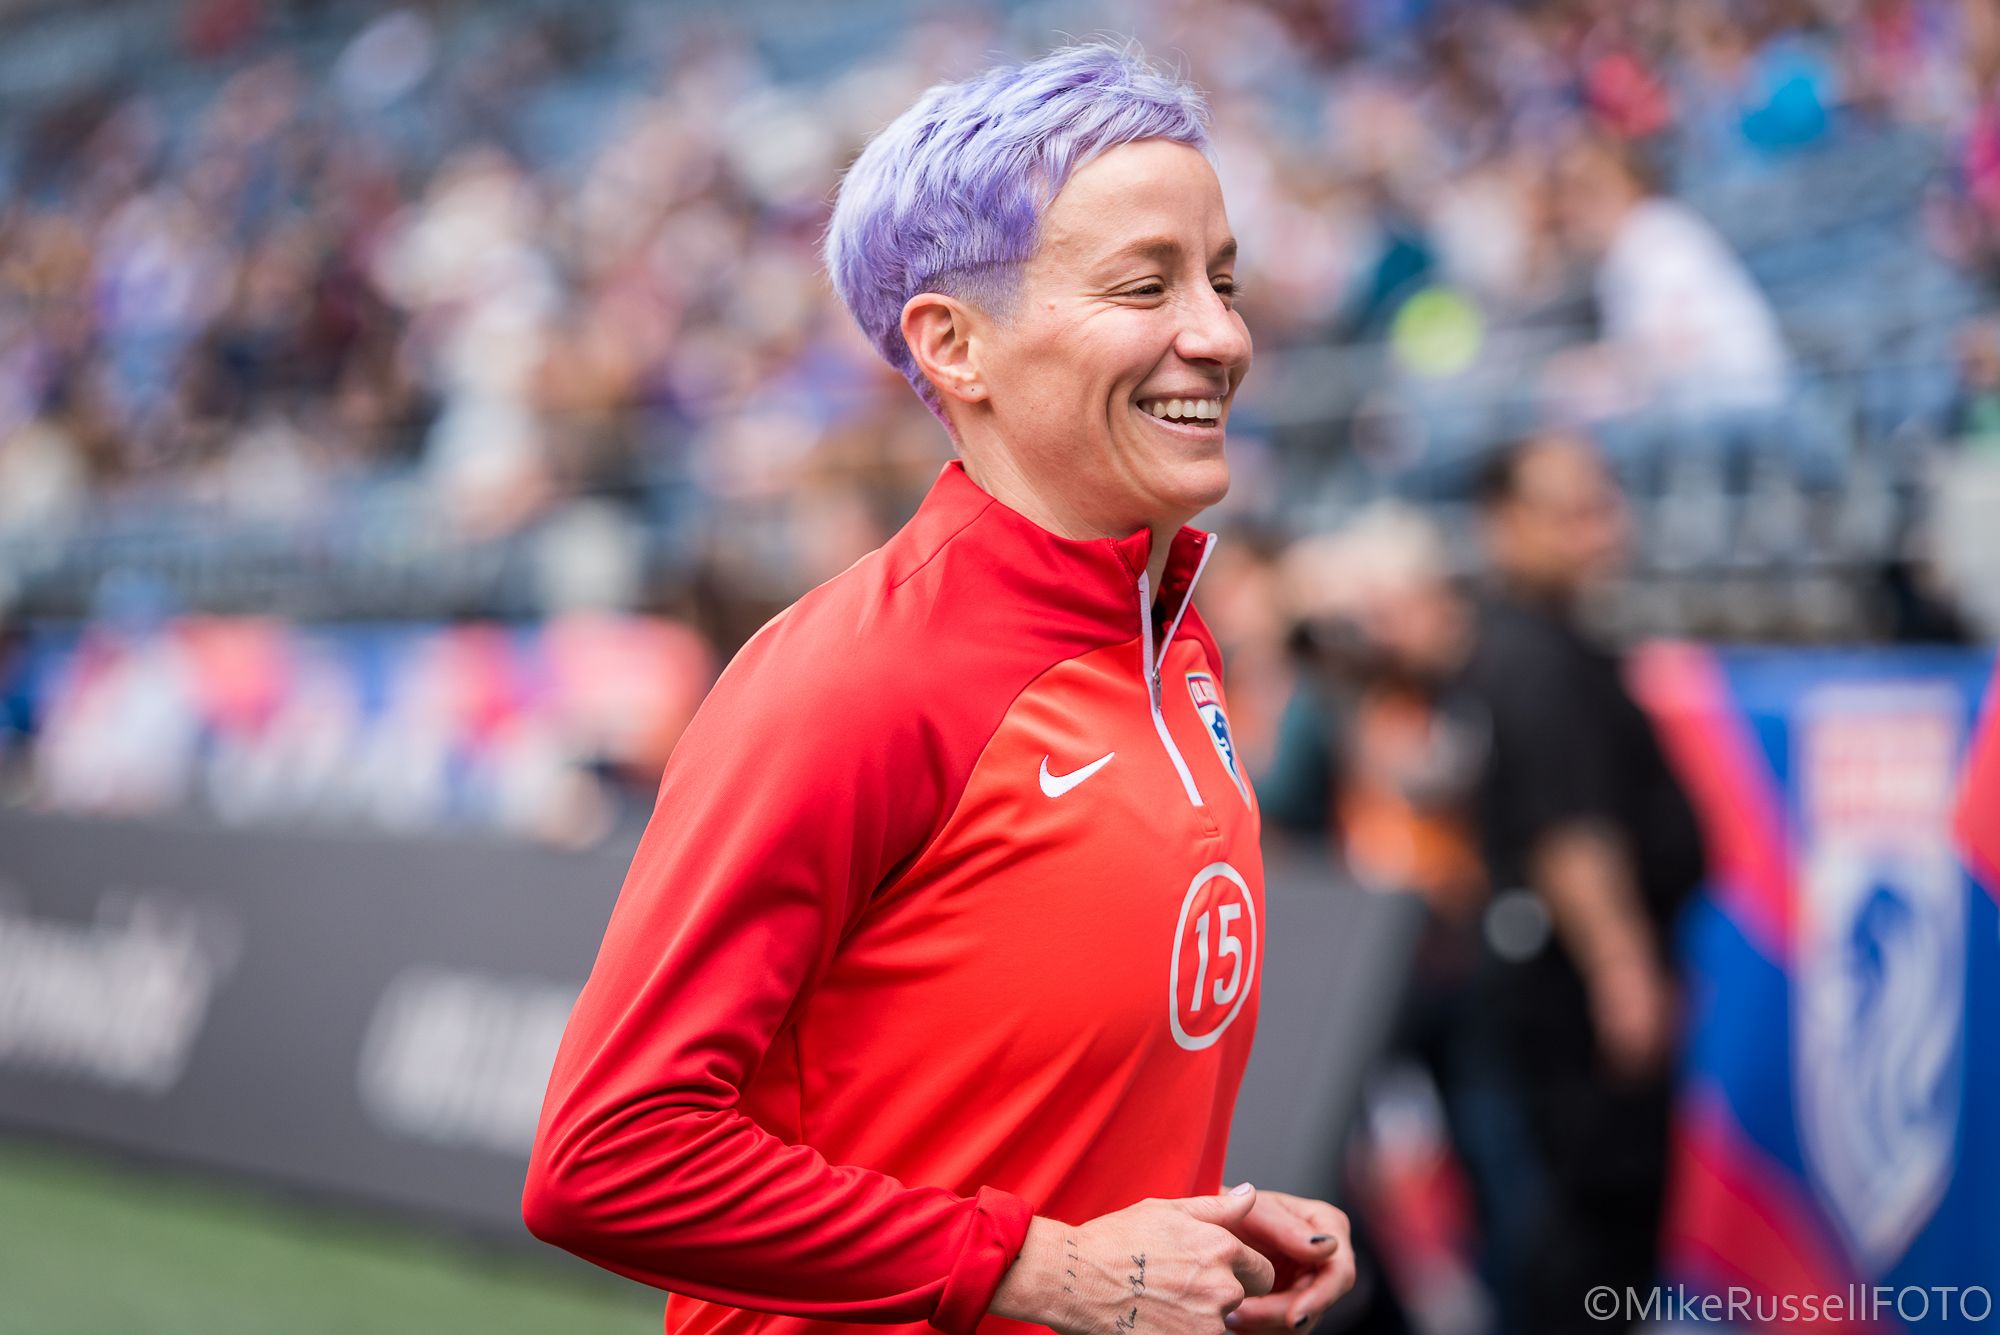 Rapinoe farewell game moved up two hours for primetime broadcast TV